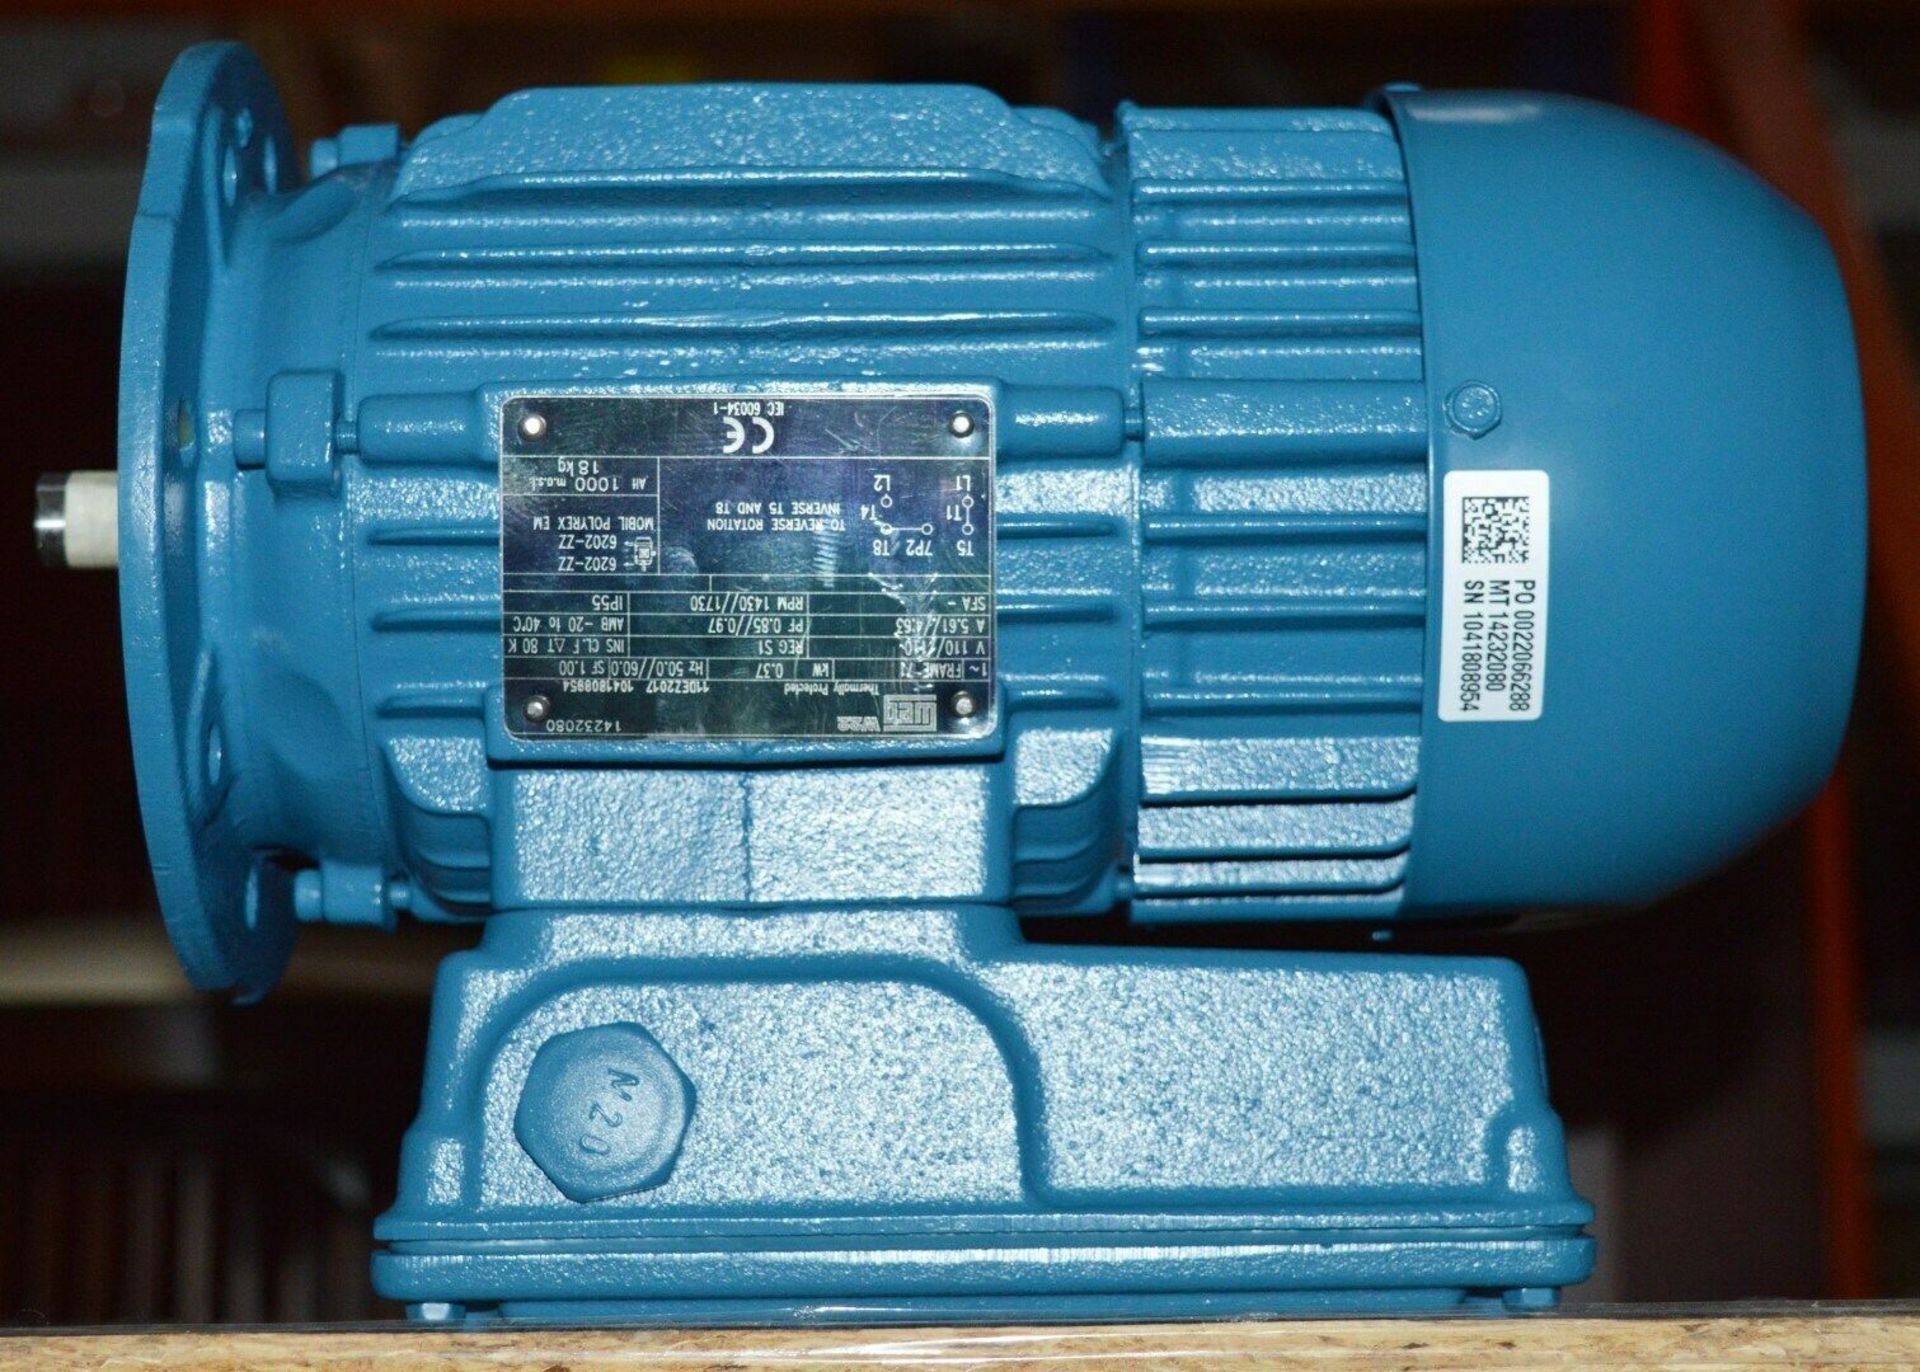 1 x Weg W22 110v IP55 Single Phase Electric Motor - Brand New and Boxed - CL295 - Location: